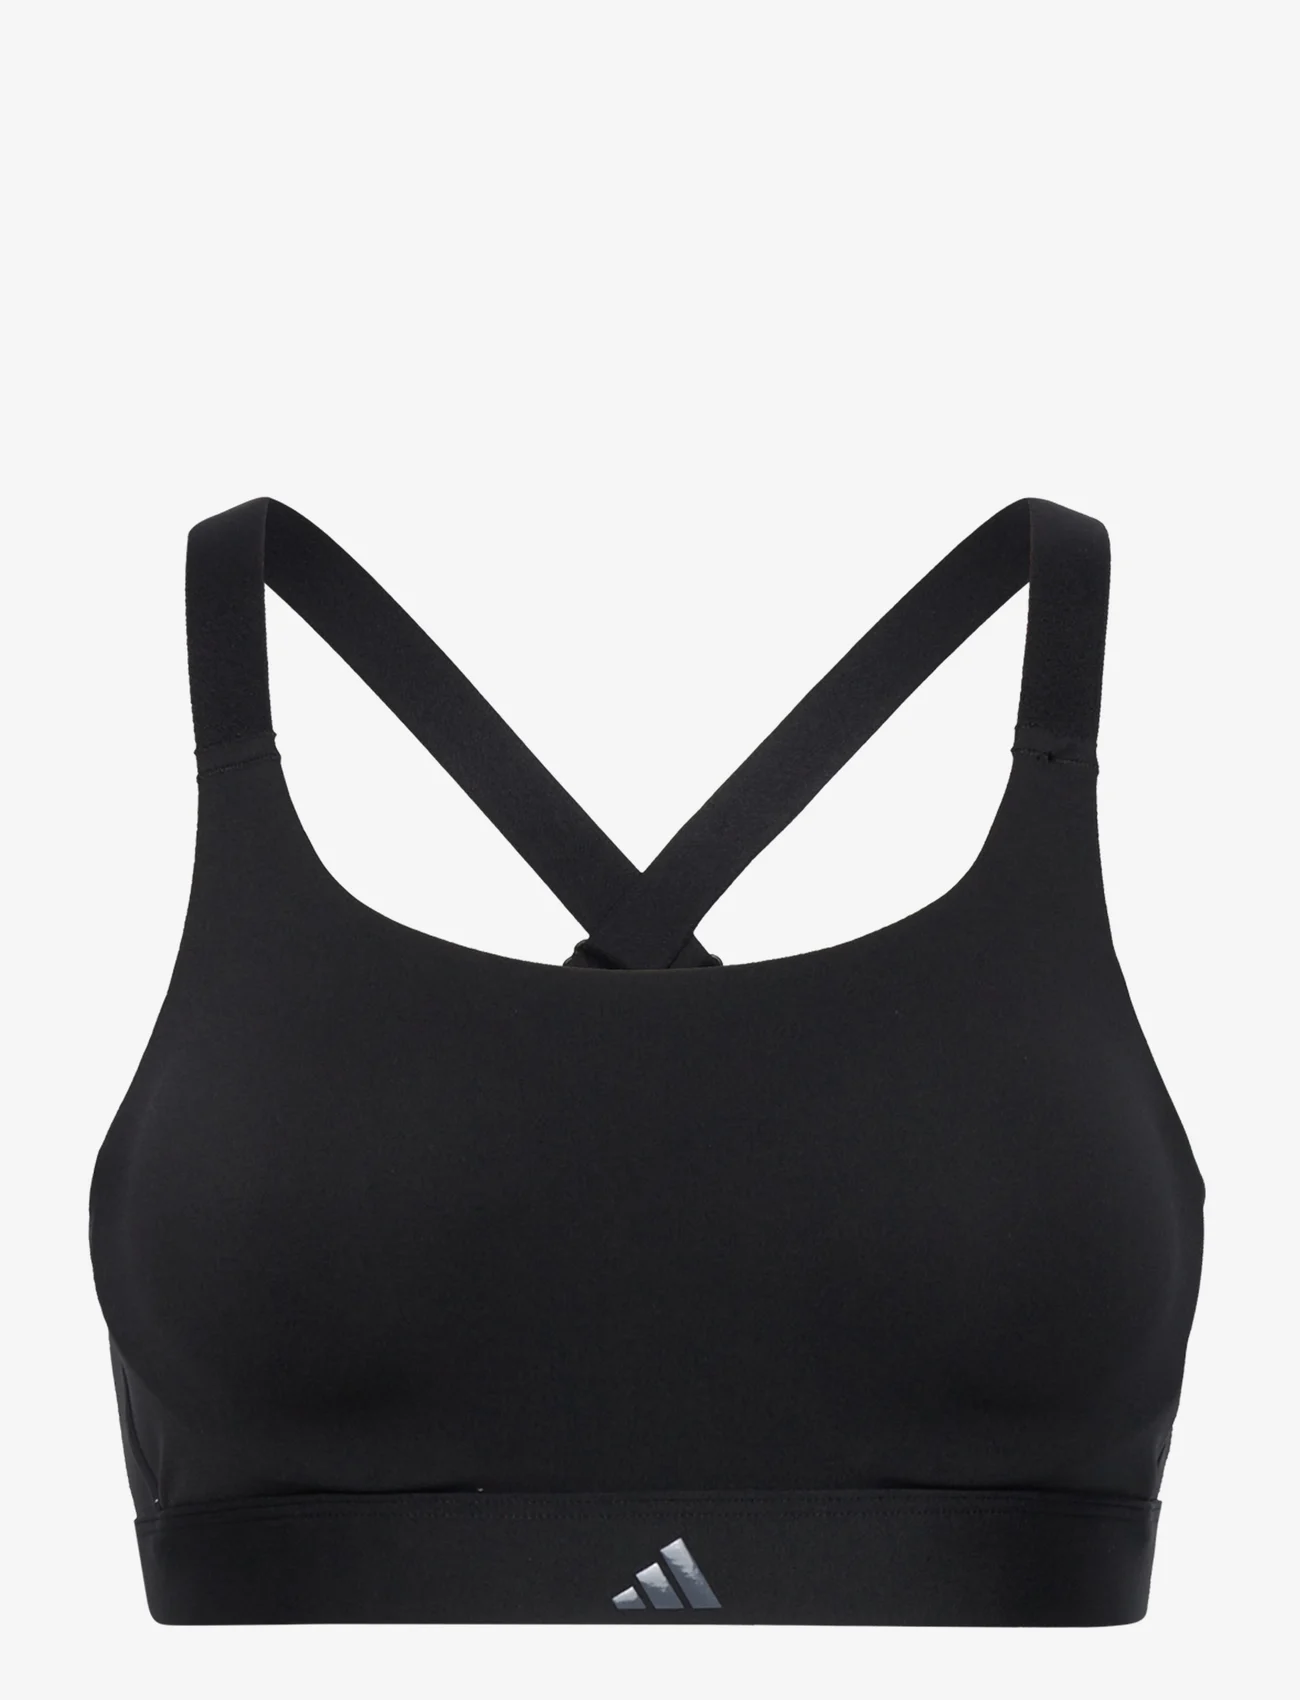 adidas Performance - Tailored Impact Luxe Training High-Support Bra - sport bras: high support - black - 0